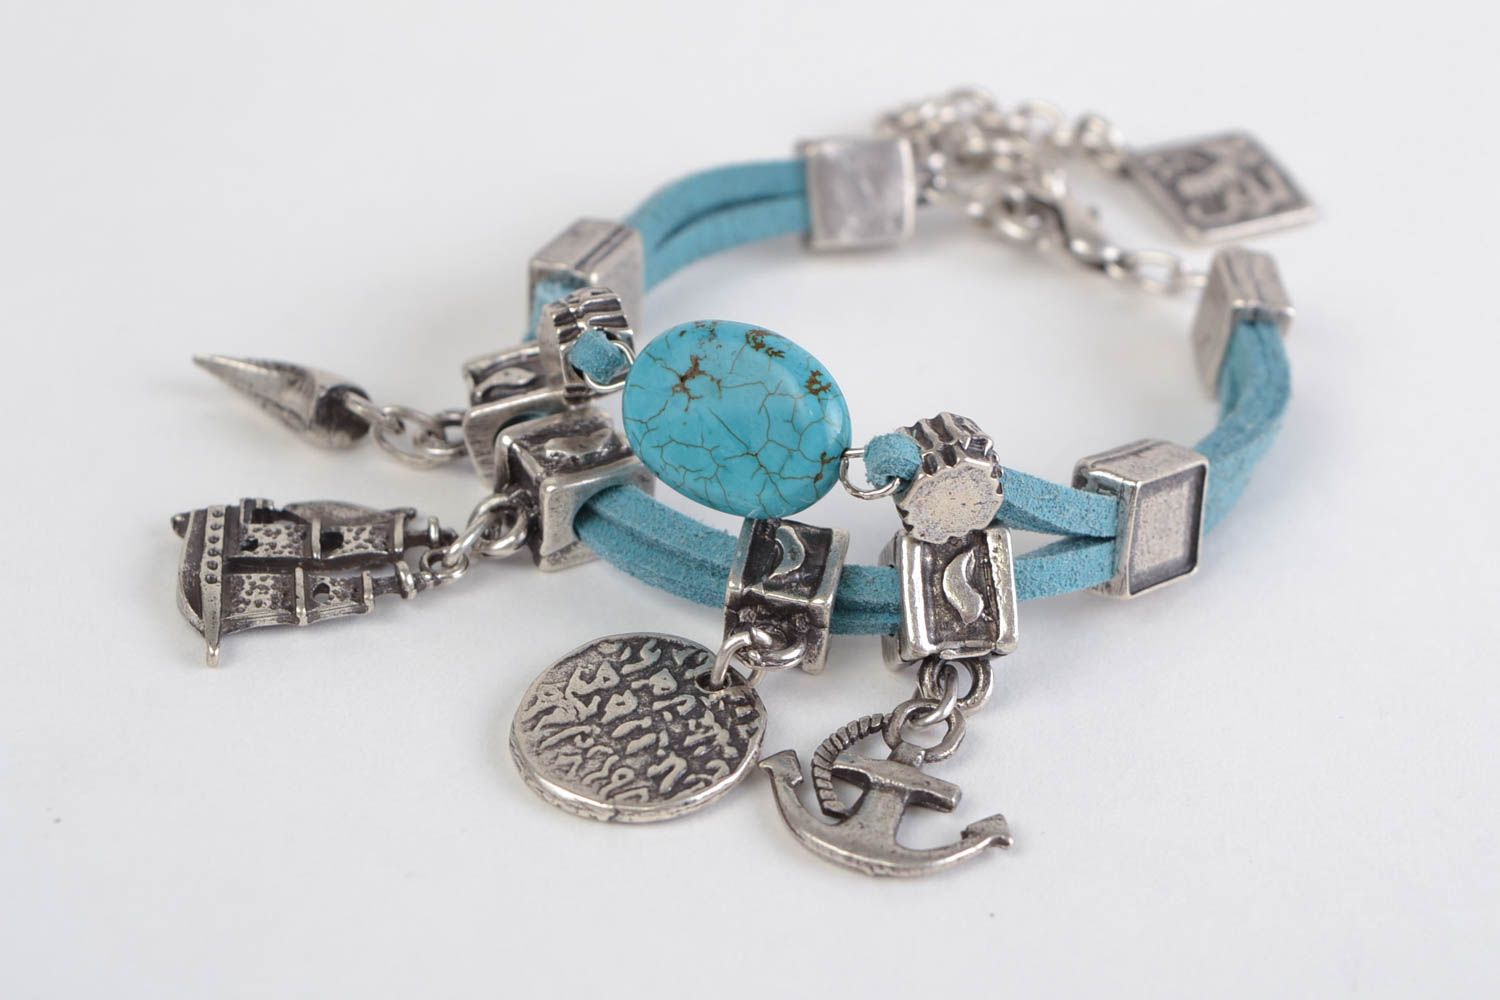 Handmade leather cord wrist bracelet with metal charms and turquoise for women photo 2